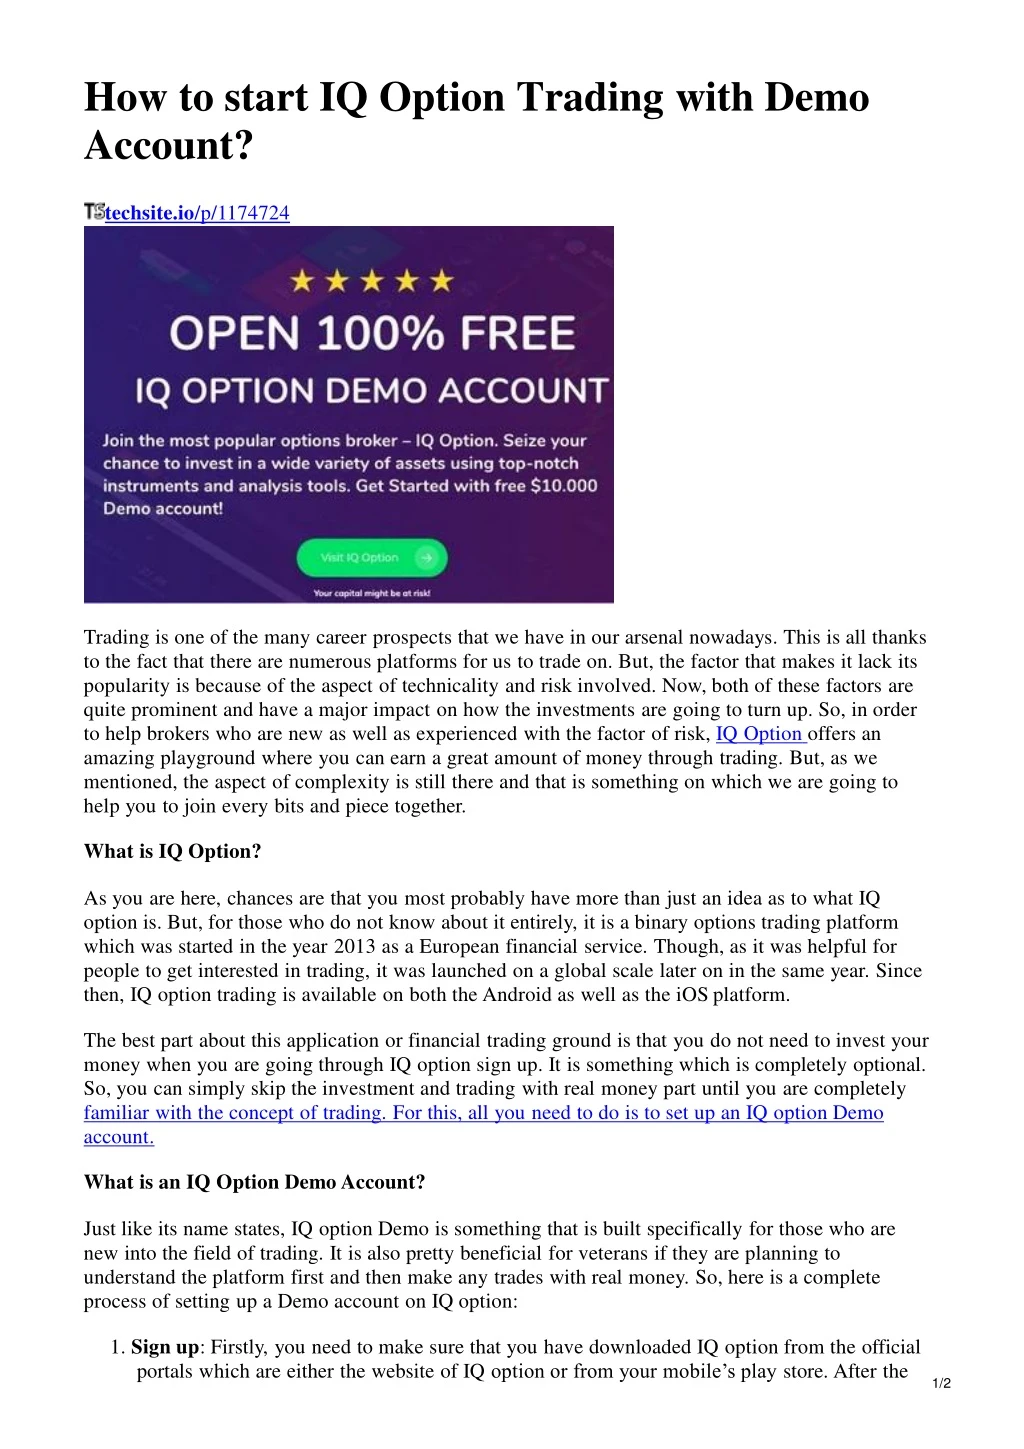 how to start iq option trading with demo account